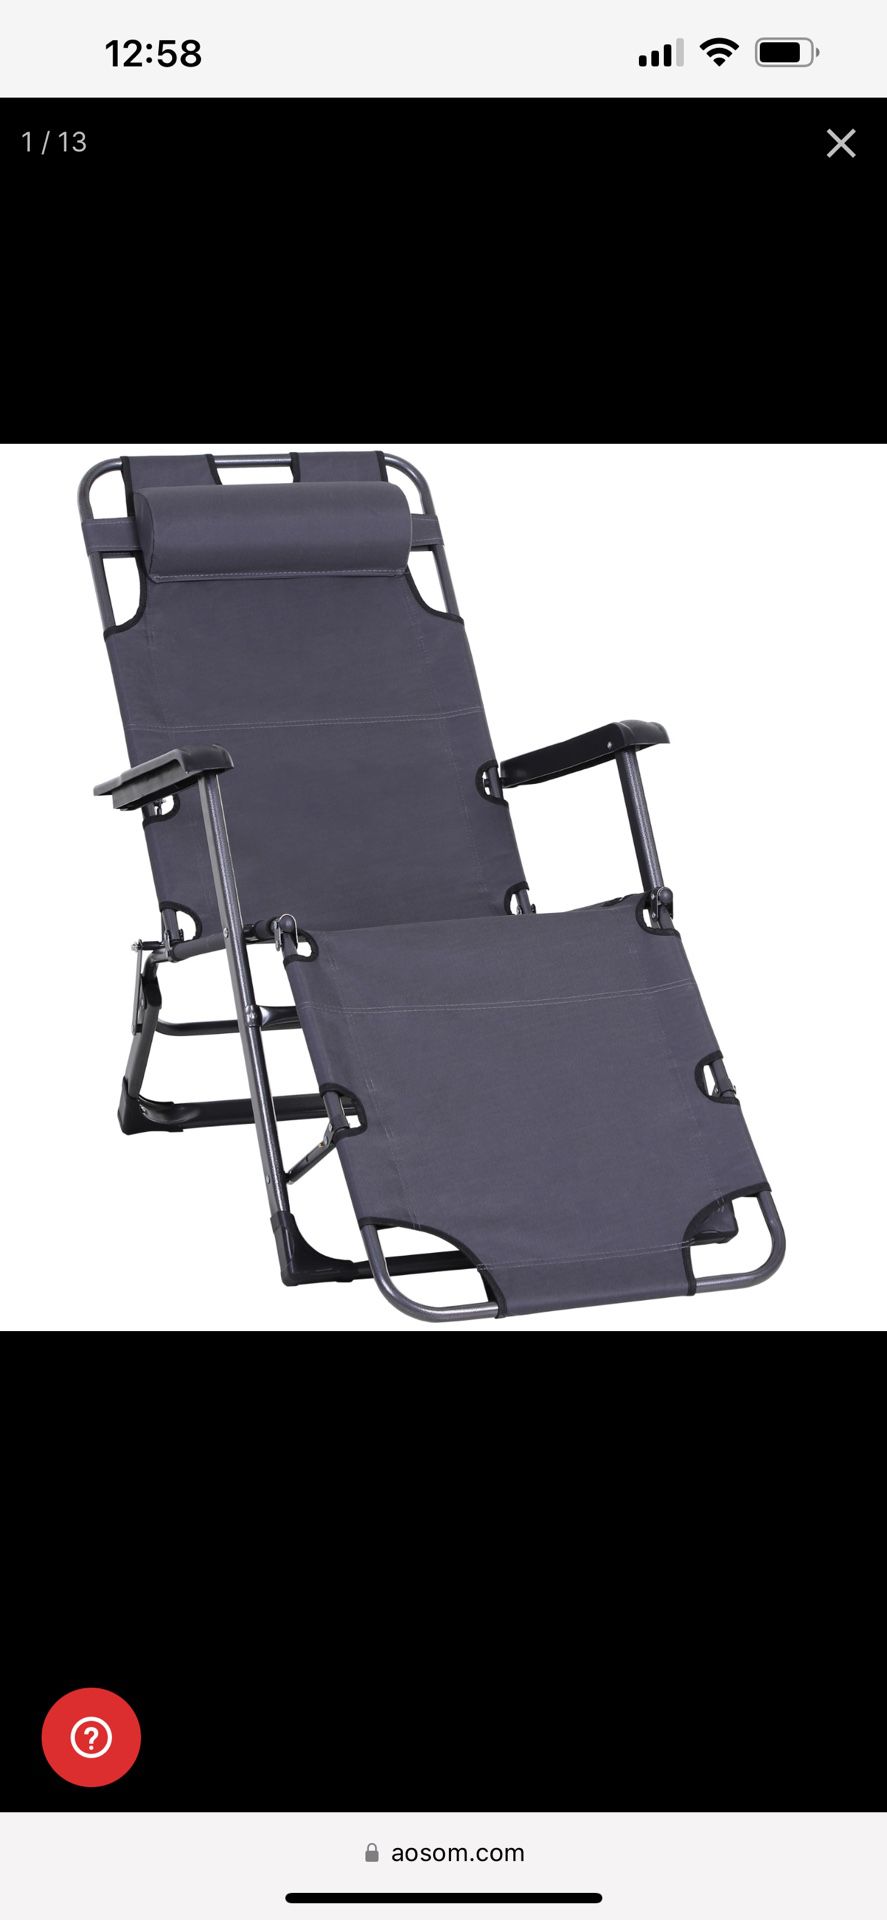 New in box Folding Chaise Lounge Chair for Outside, 2-in-1 Tanning Chair with Pillow & Pocket, Adjustable Pool Chair for Beach, Patio, Lawn, Deck, Gra